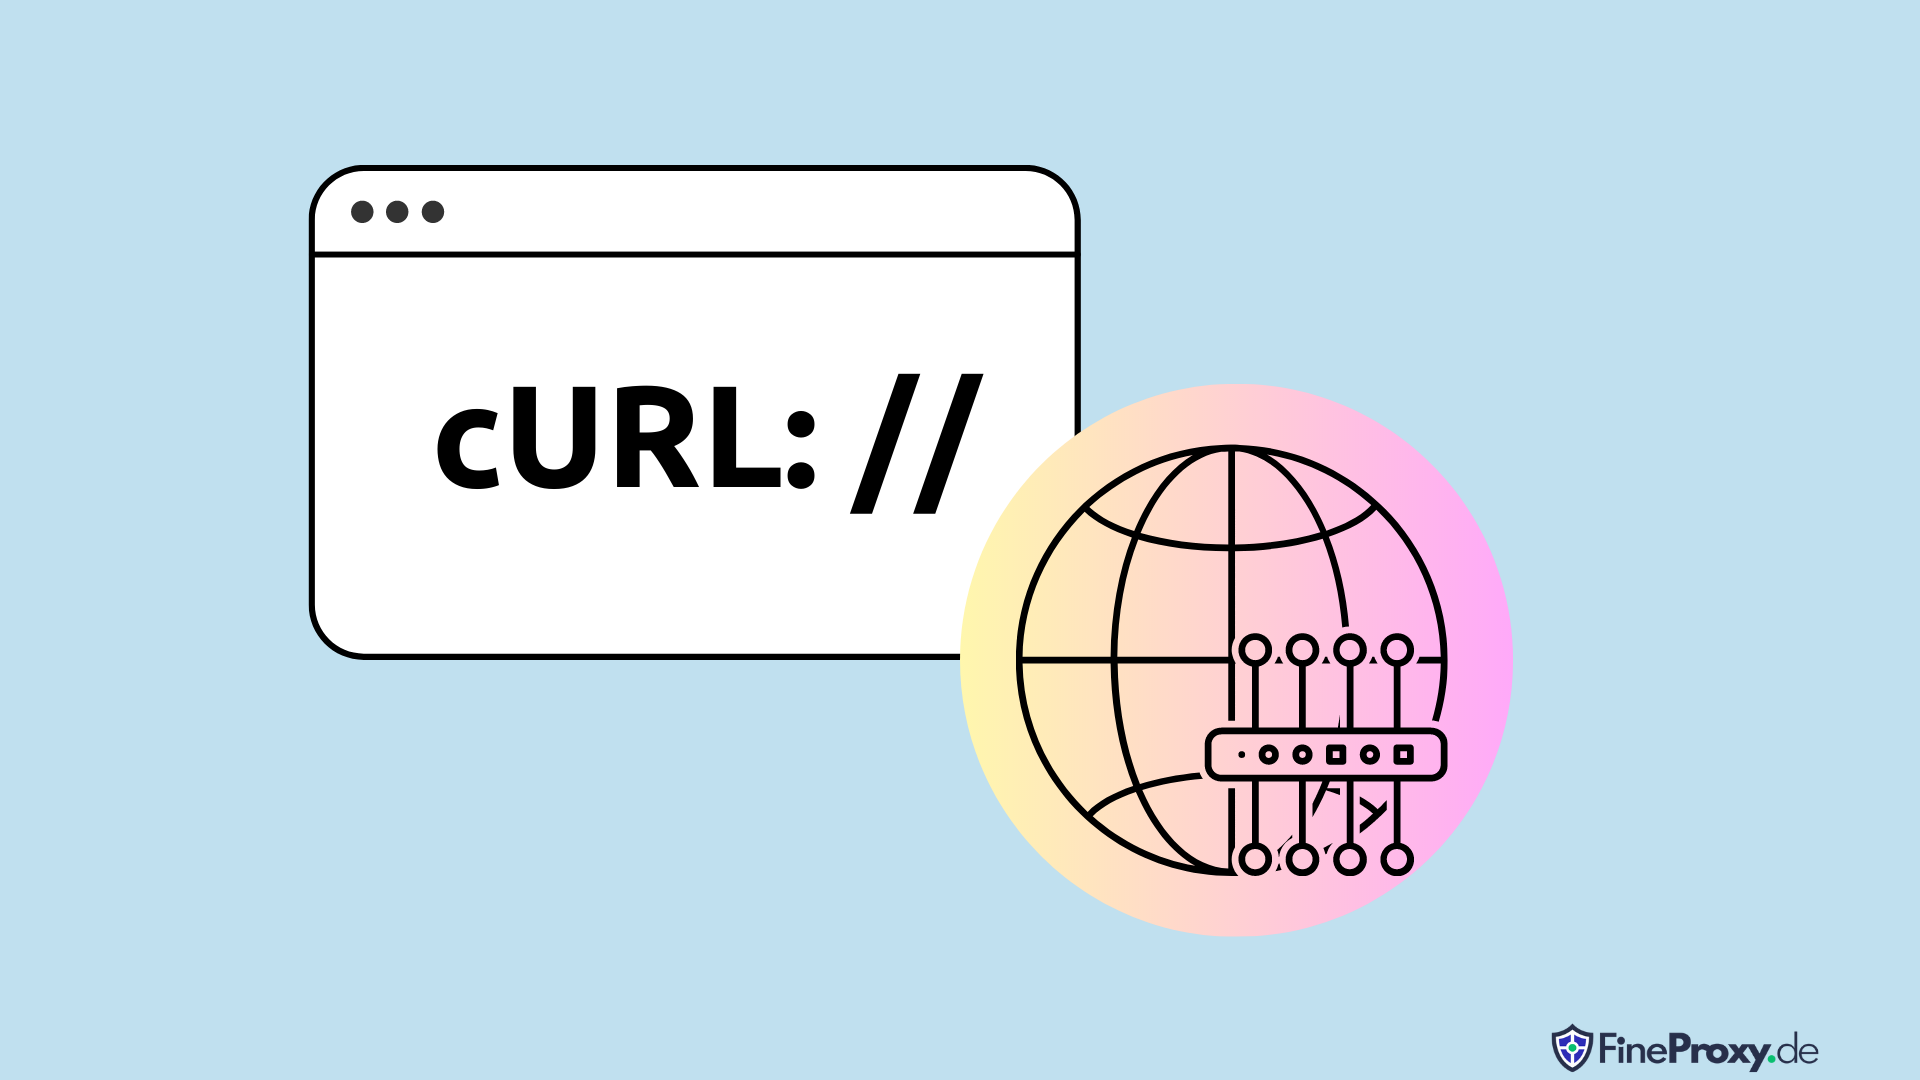 How tо Use cURL with Proxy: A Step-by-Step Guide with 7 Tips and Tricks for 2023